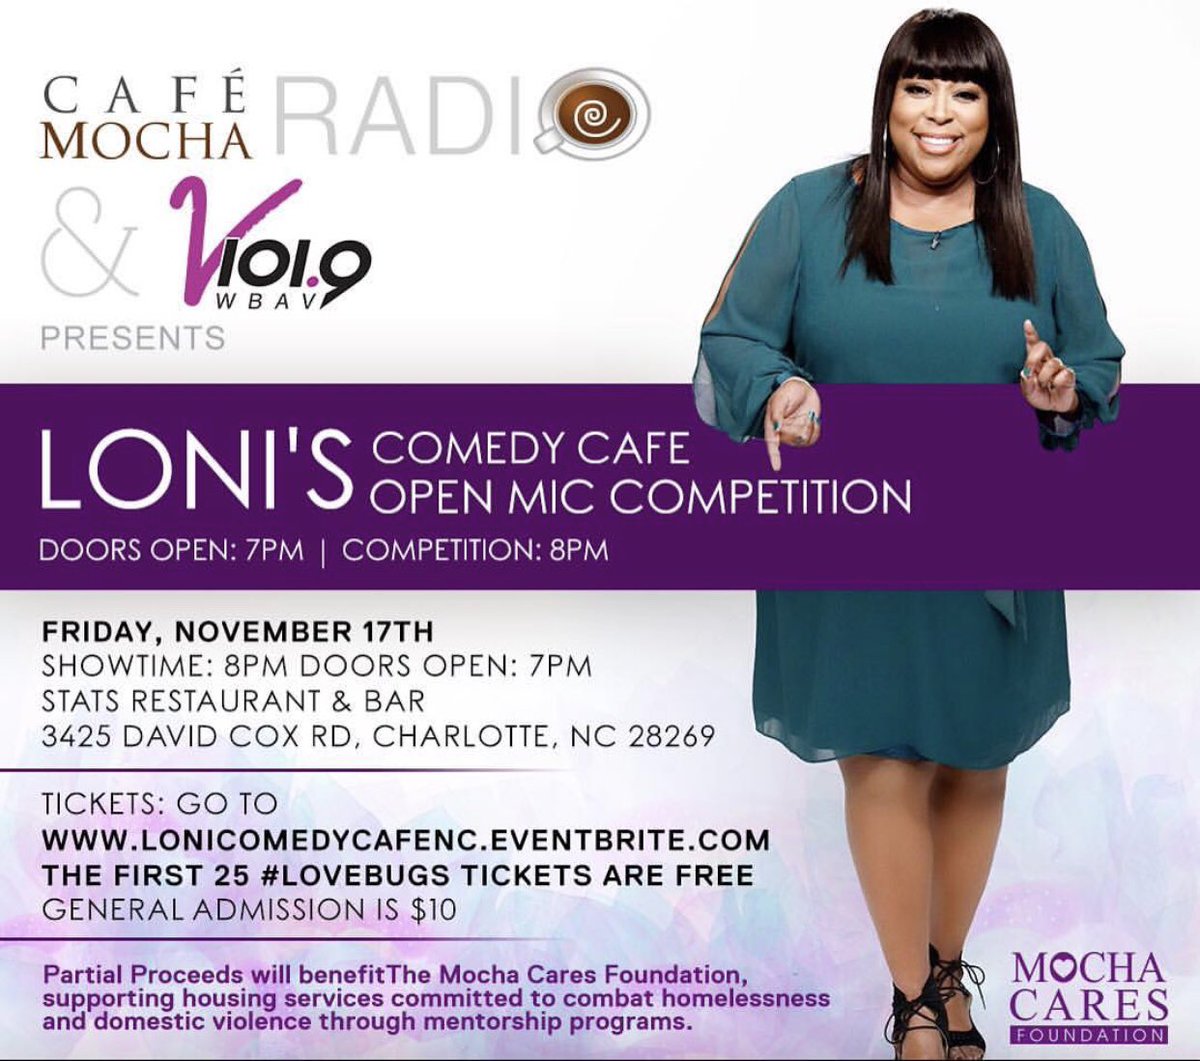 Cafe Mocha Radio Takes Over Charlotte this weekend! our 1st Annual Salute Her: Beauty of Diversity in Charlotte on November 18th! Our friend April Ryan joins us for a very special 1-on-1. #ToyotaGreen #AARPHereWithYou #MielleOrganics